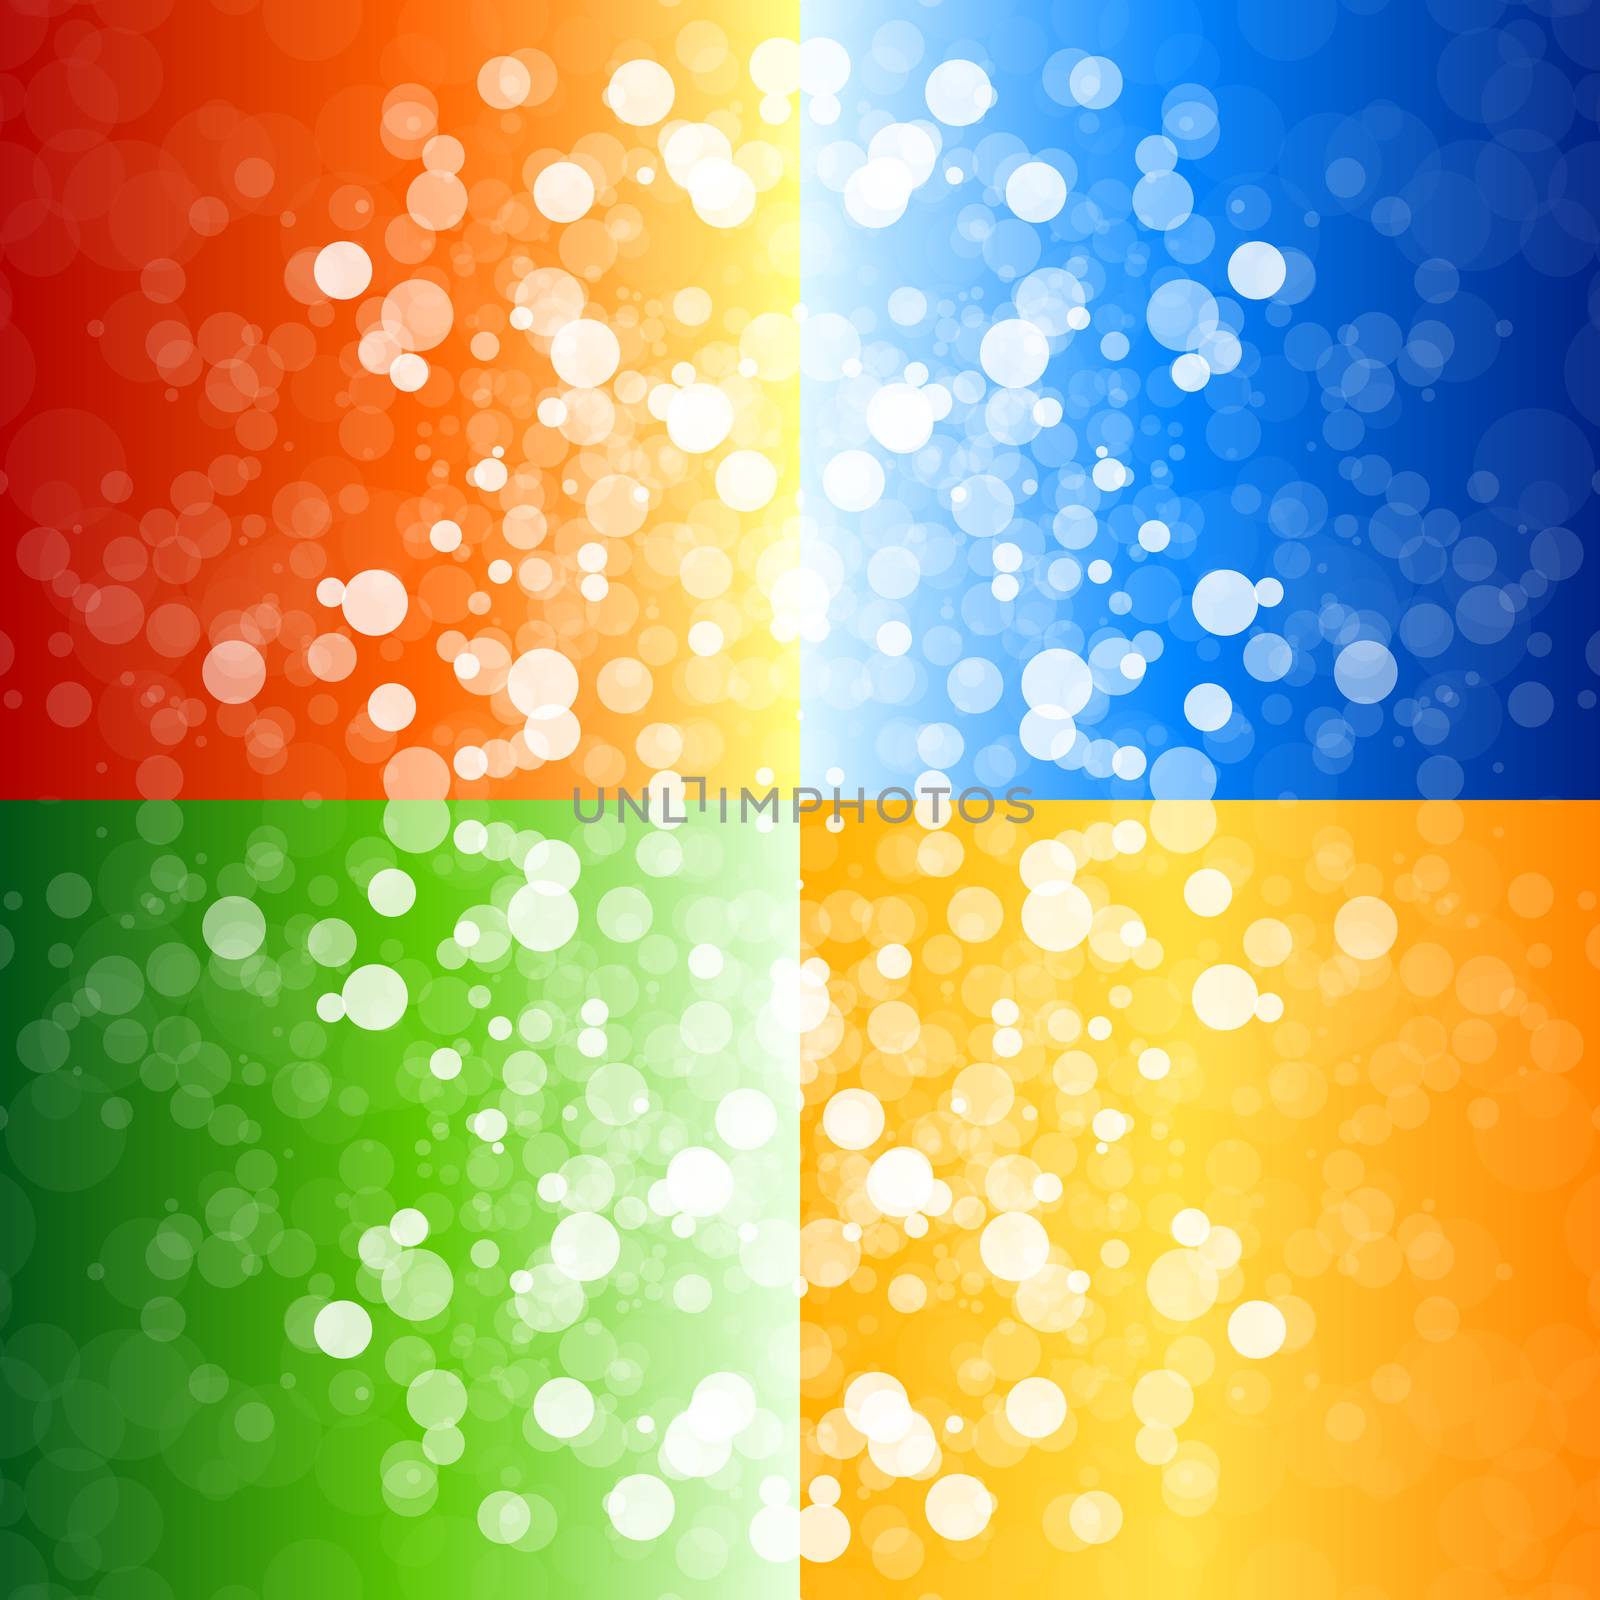 Four blurry lights backgrounds by WaD